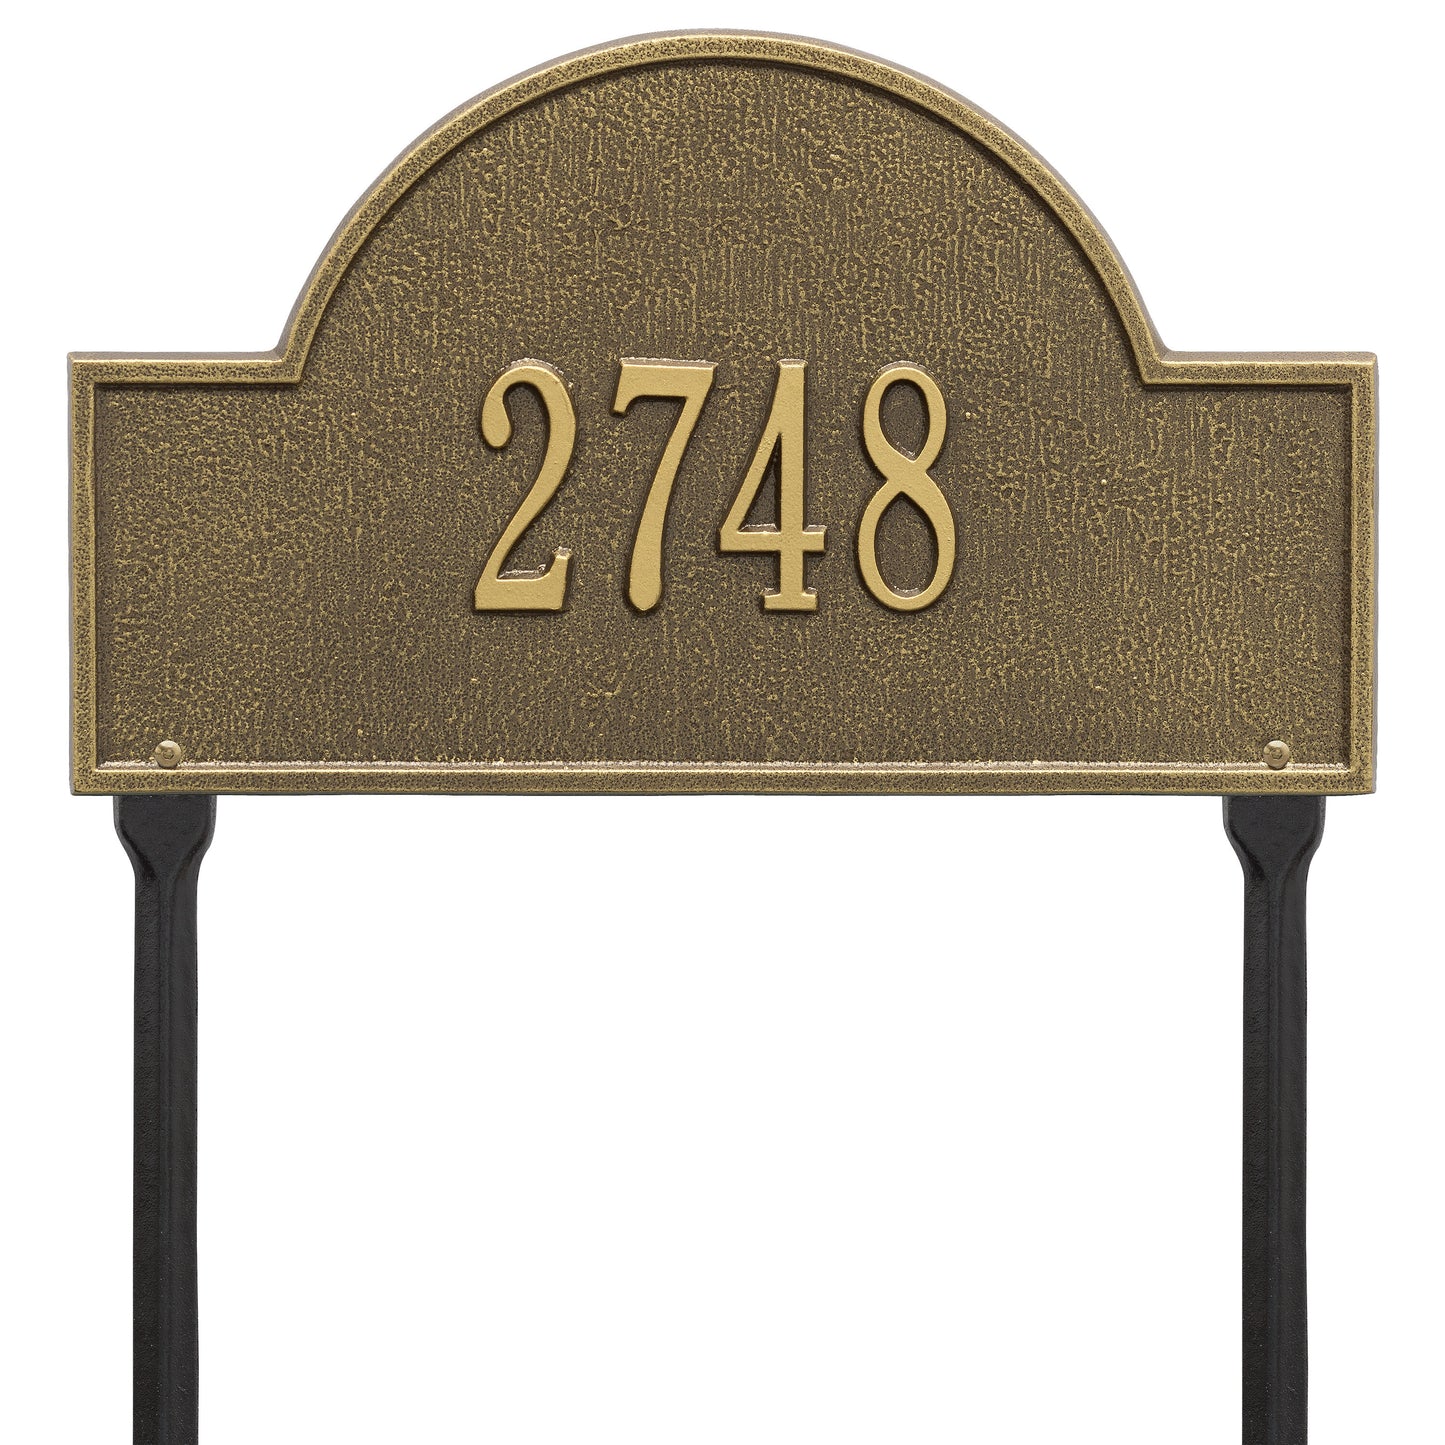 Whitehall Products Arch Marker Standard Lawn Plaque One Line Black/white